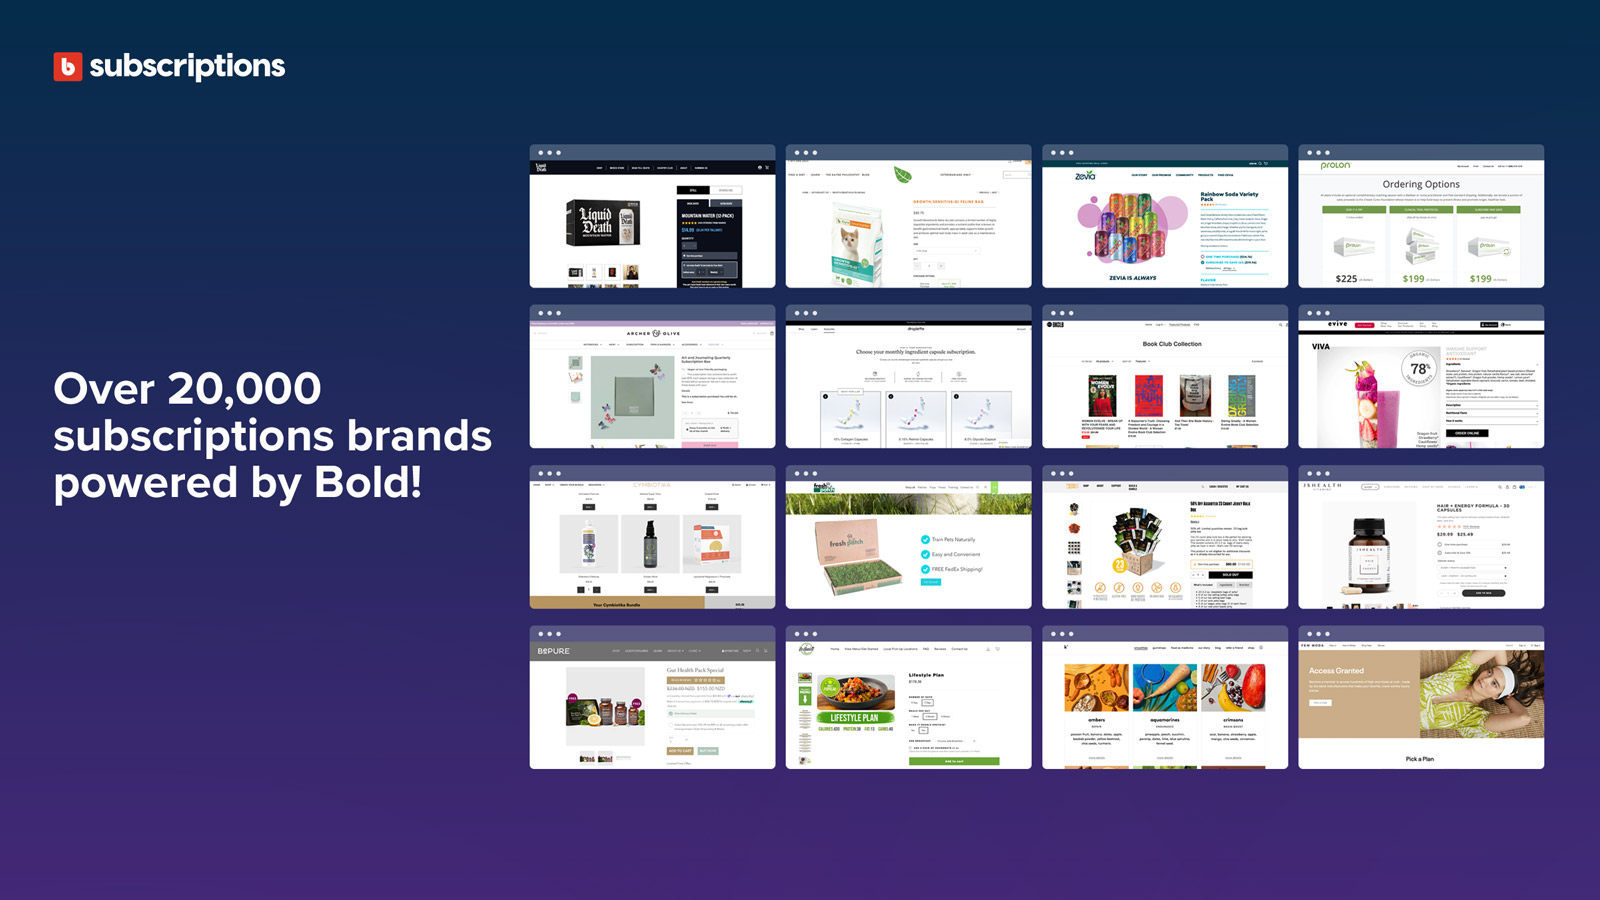 Over 20,000 subscriptions brands powered by Bold!